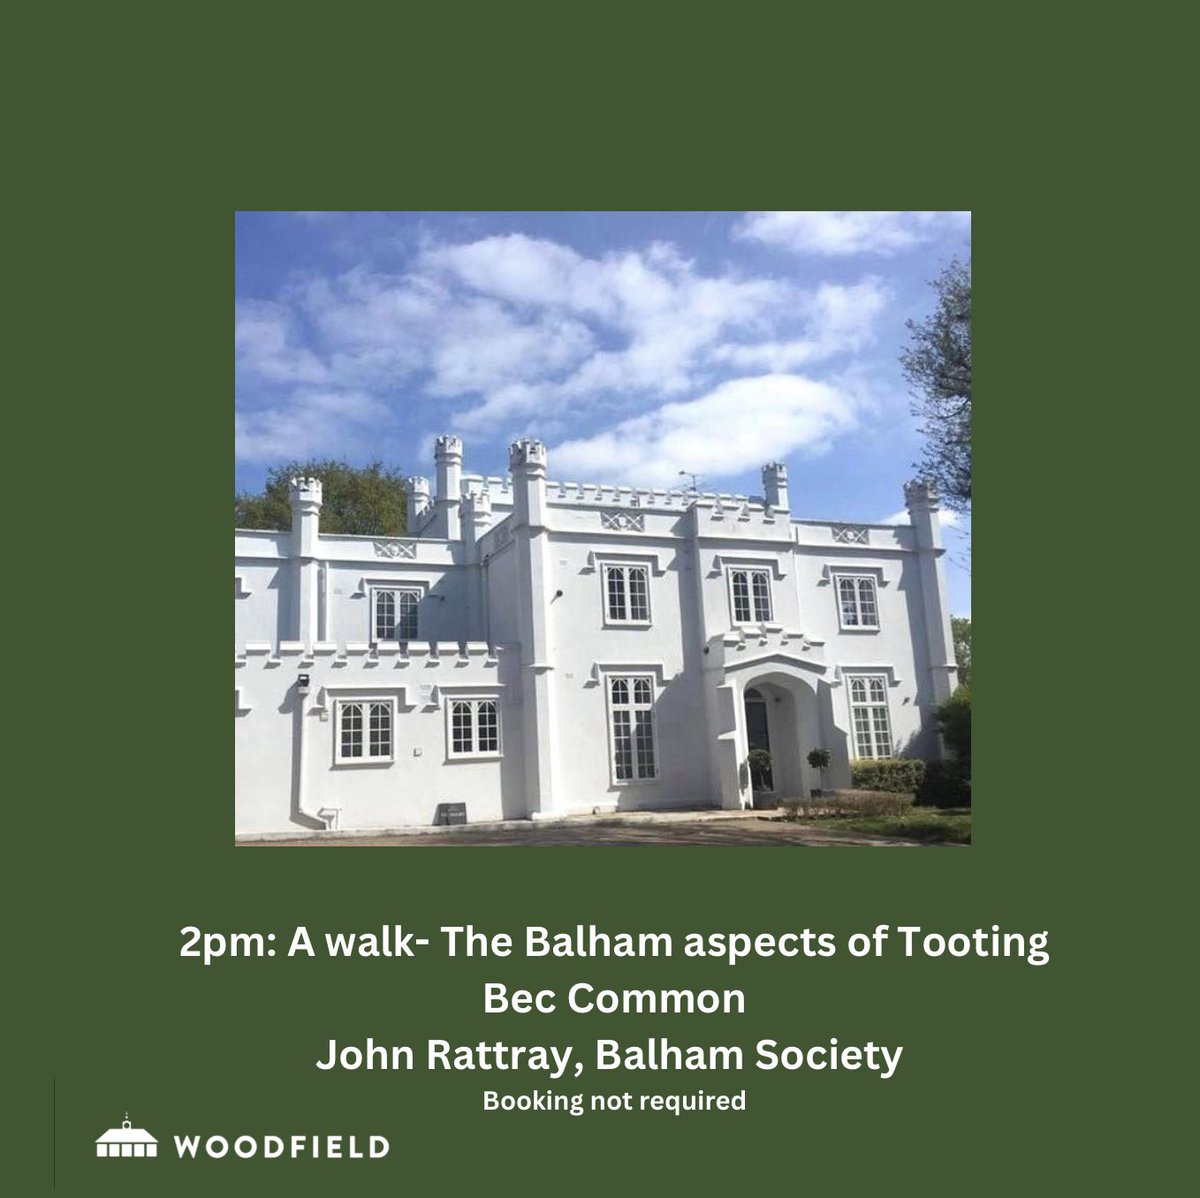 Guided Walk with John Rattray, The Balham aspects of Tooting Bec Common, at The Woodfield Pavilion Heritage Day 1st June 2024 at 2pm The Pavilion is situated on the edge of Tooting Bec Common and accessible from the 'triangle field' or 16A Abbotswood Road, SW16 1AP